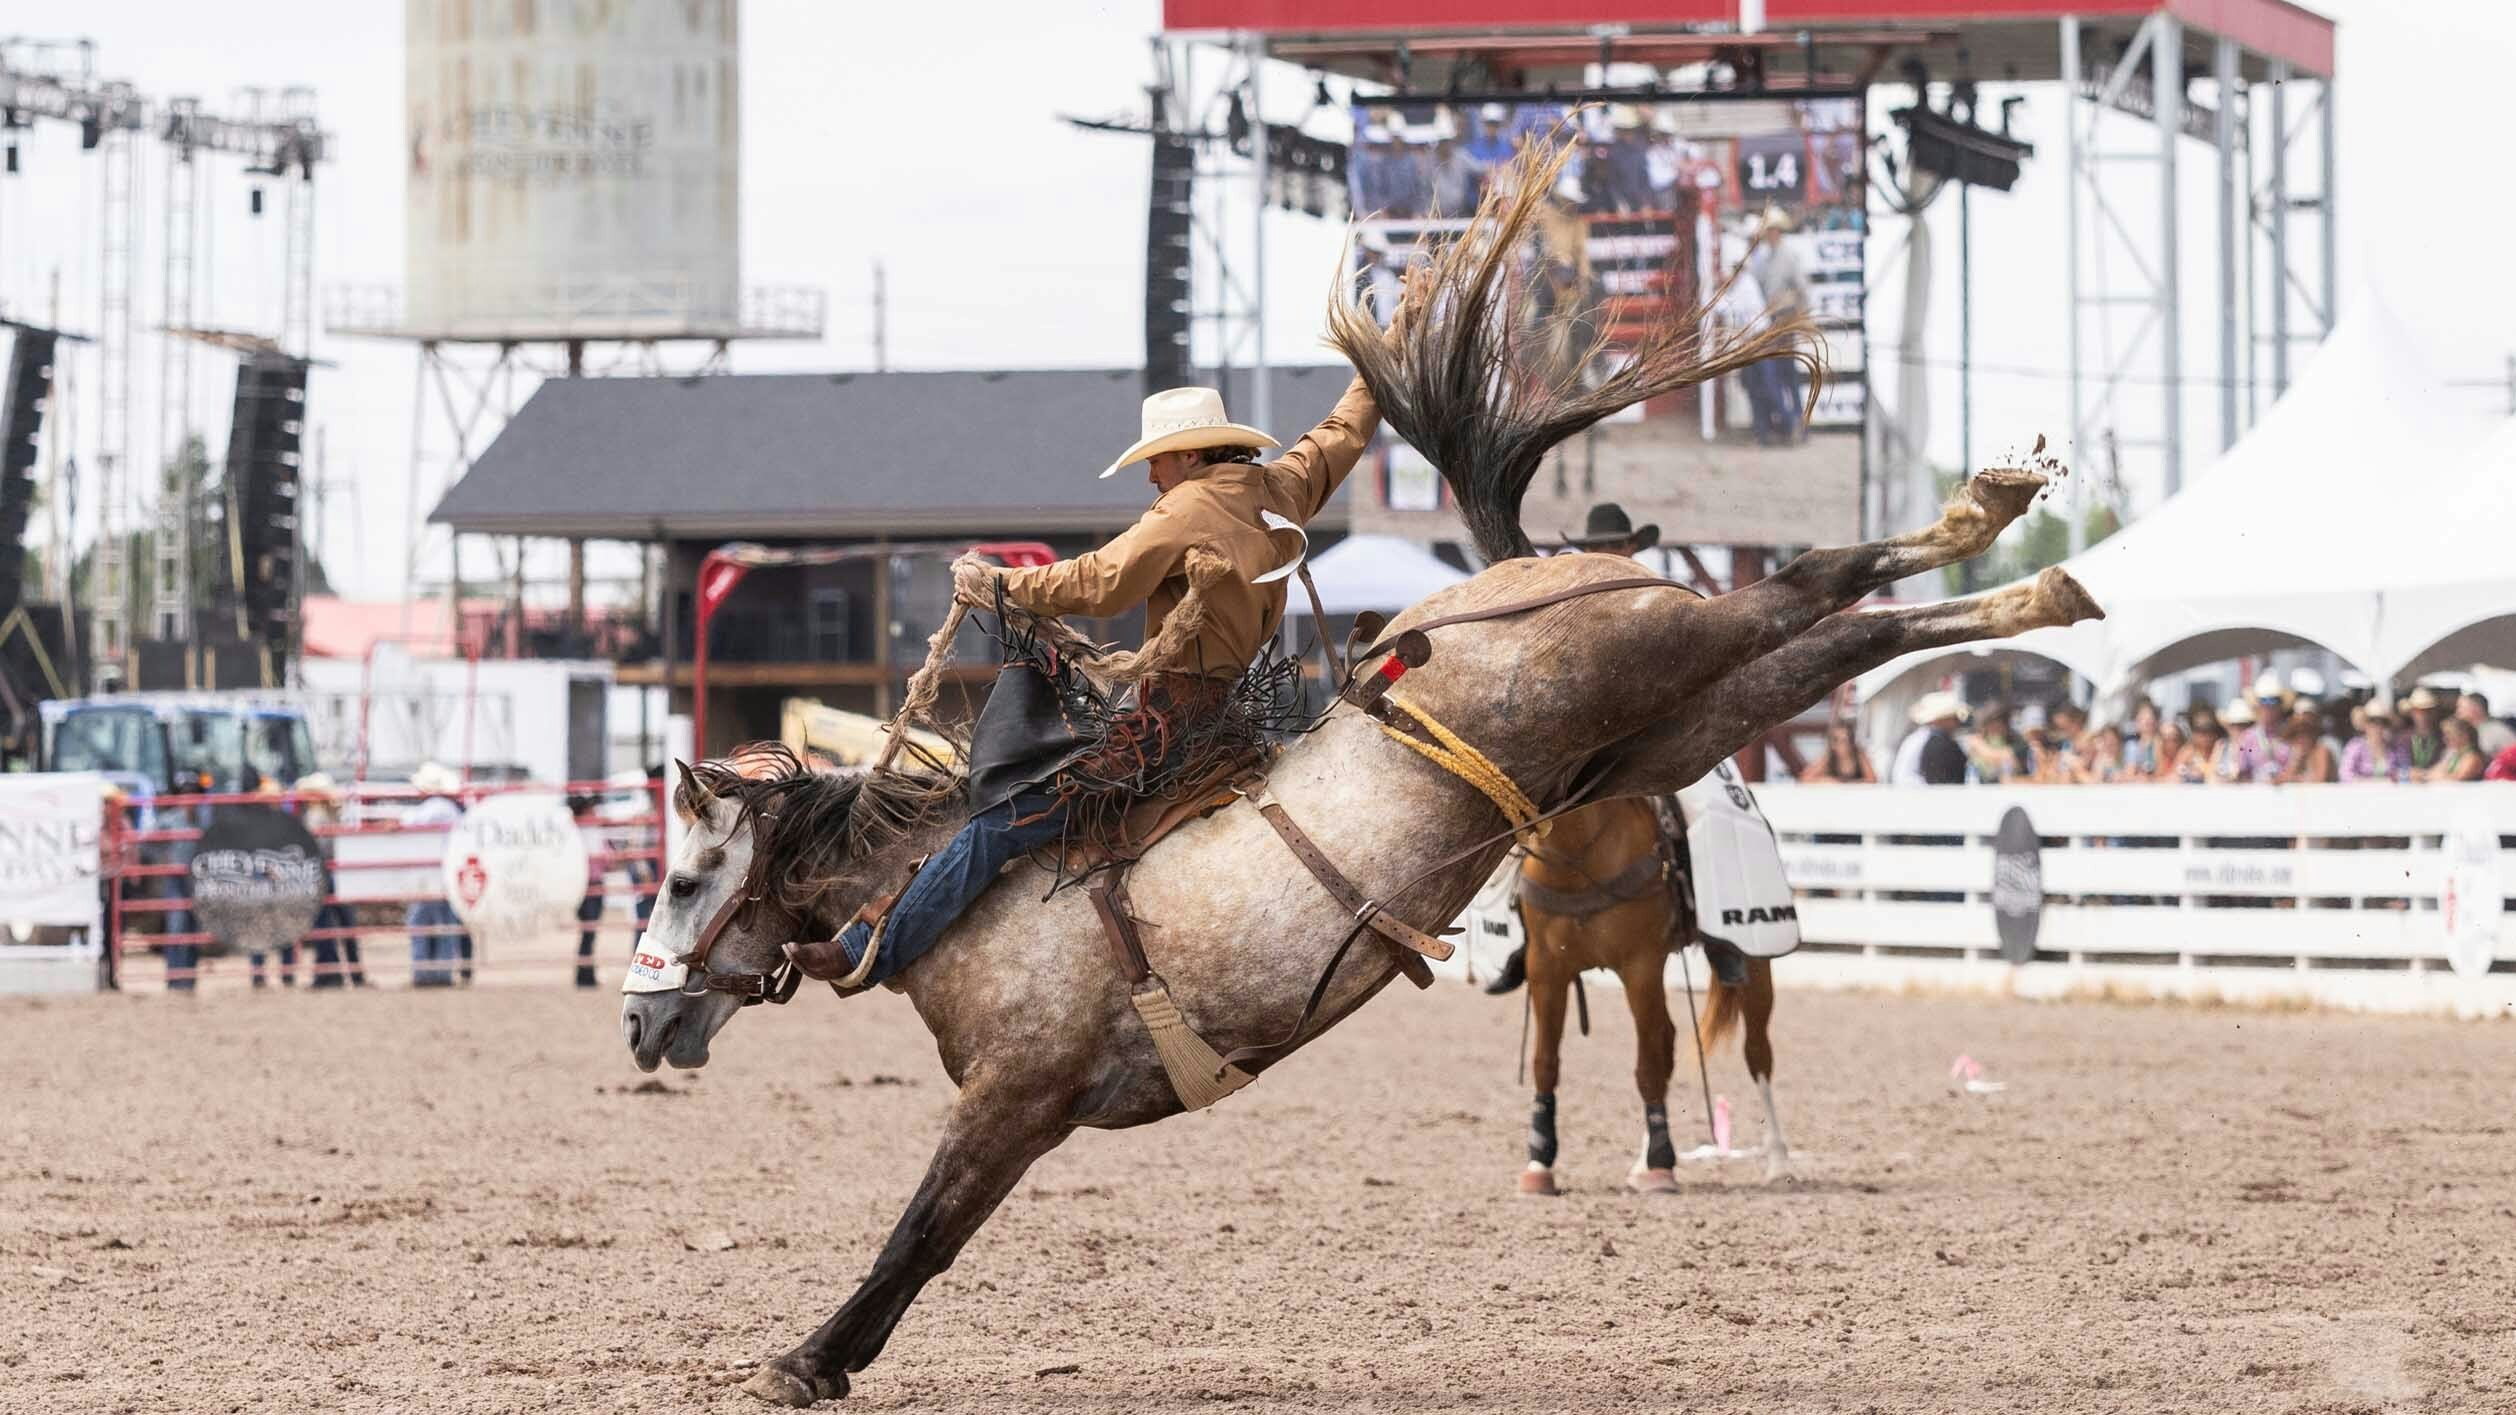 Dylan Hancock from Clarndon, Texas rides his saddlebronc horse for 79 points at Cheyenne Frontier Days on July 23, 2023.